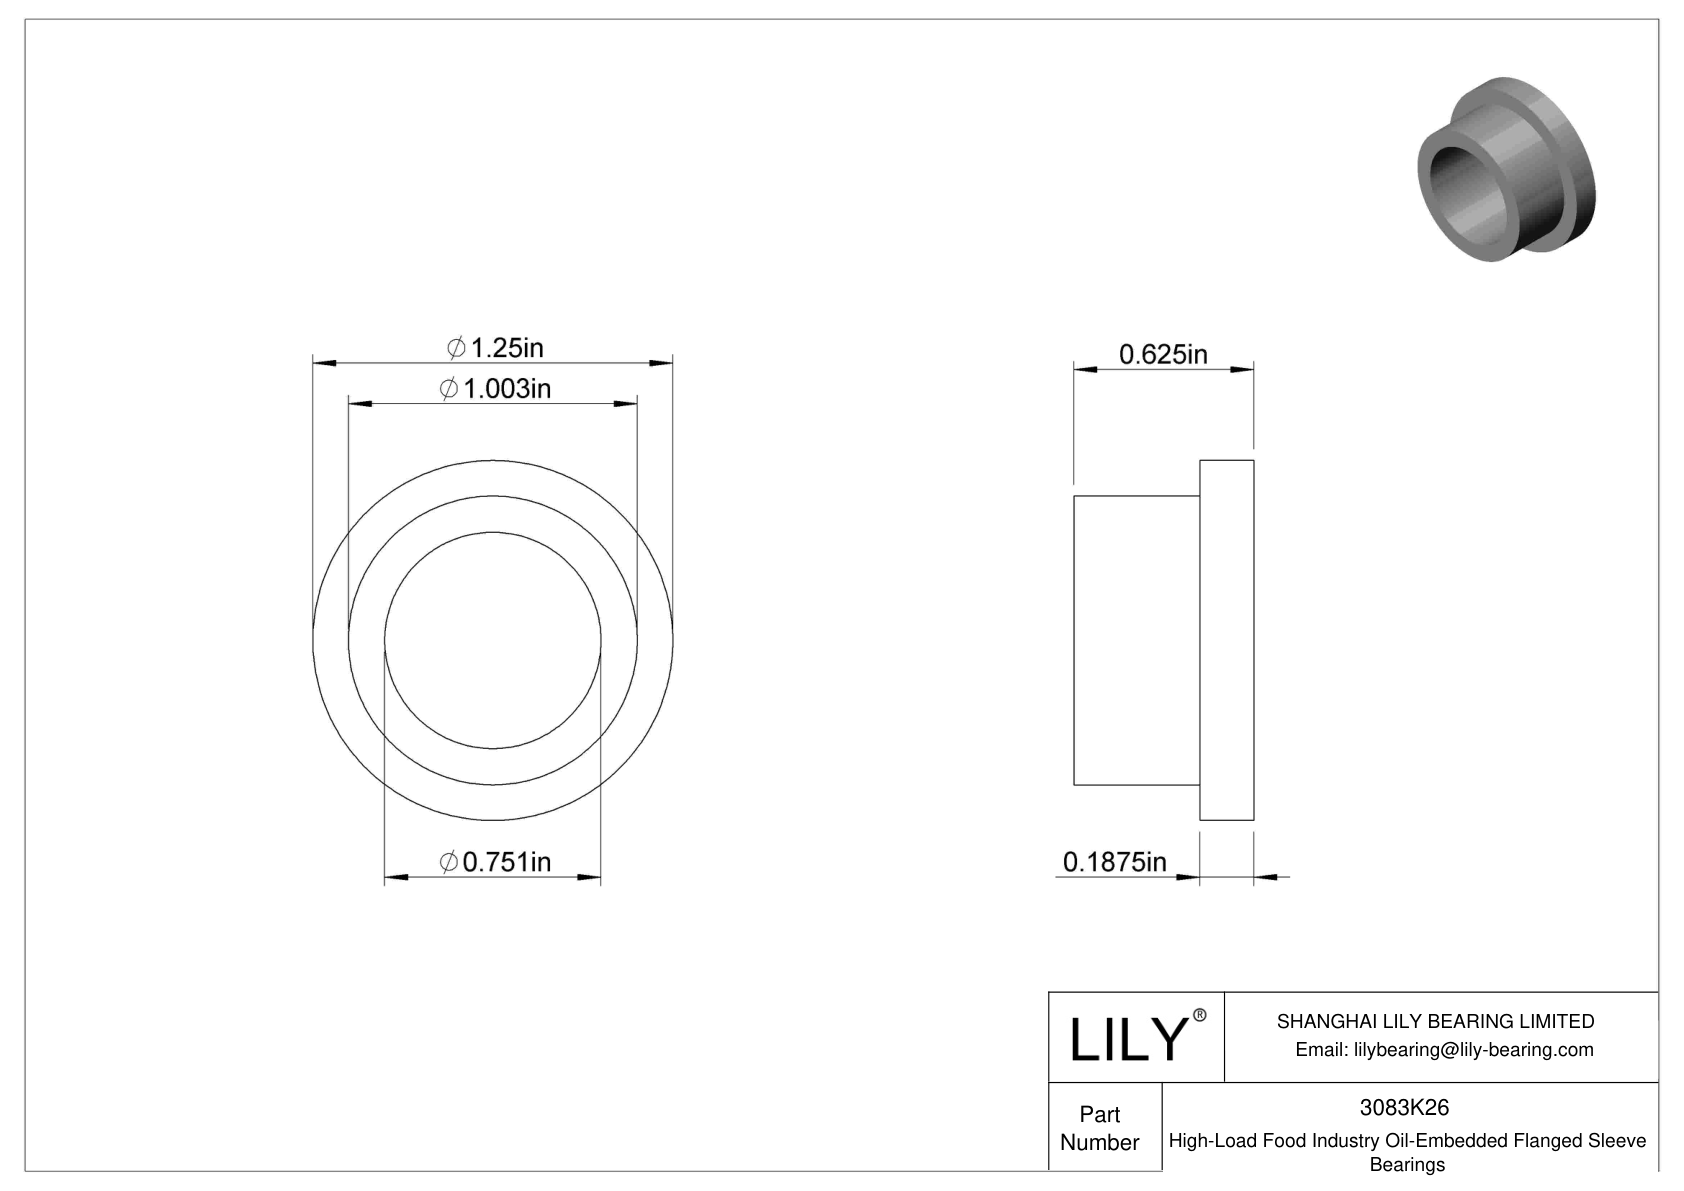 DAIDKCG High-Load Food Industry Oil-Embedded Flanged Sleeve Bearings cad drawing